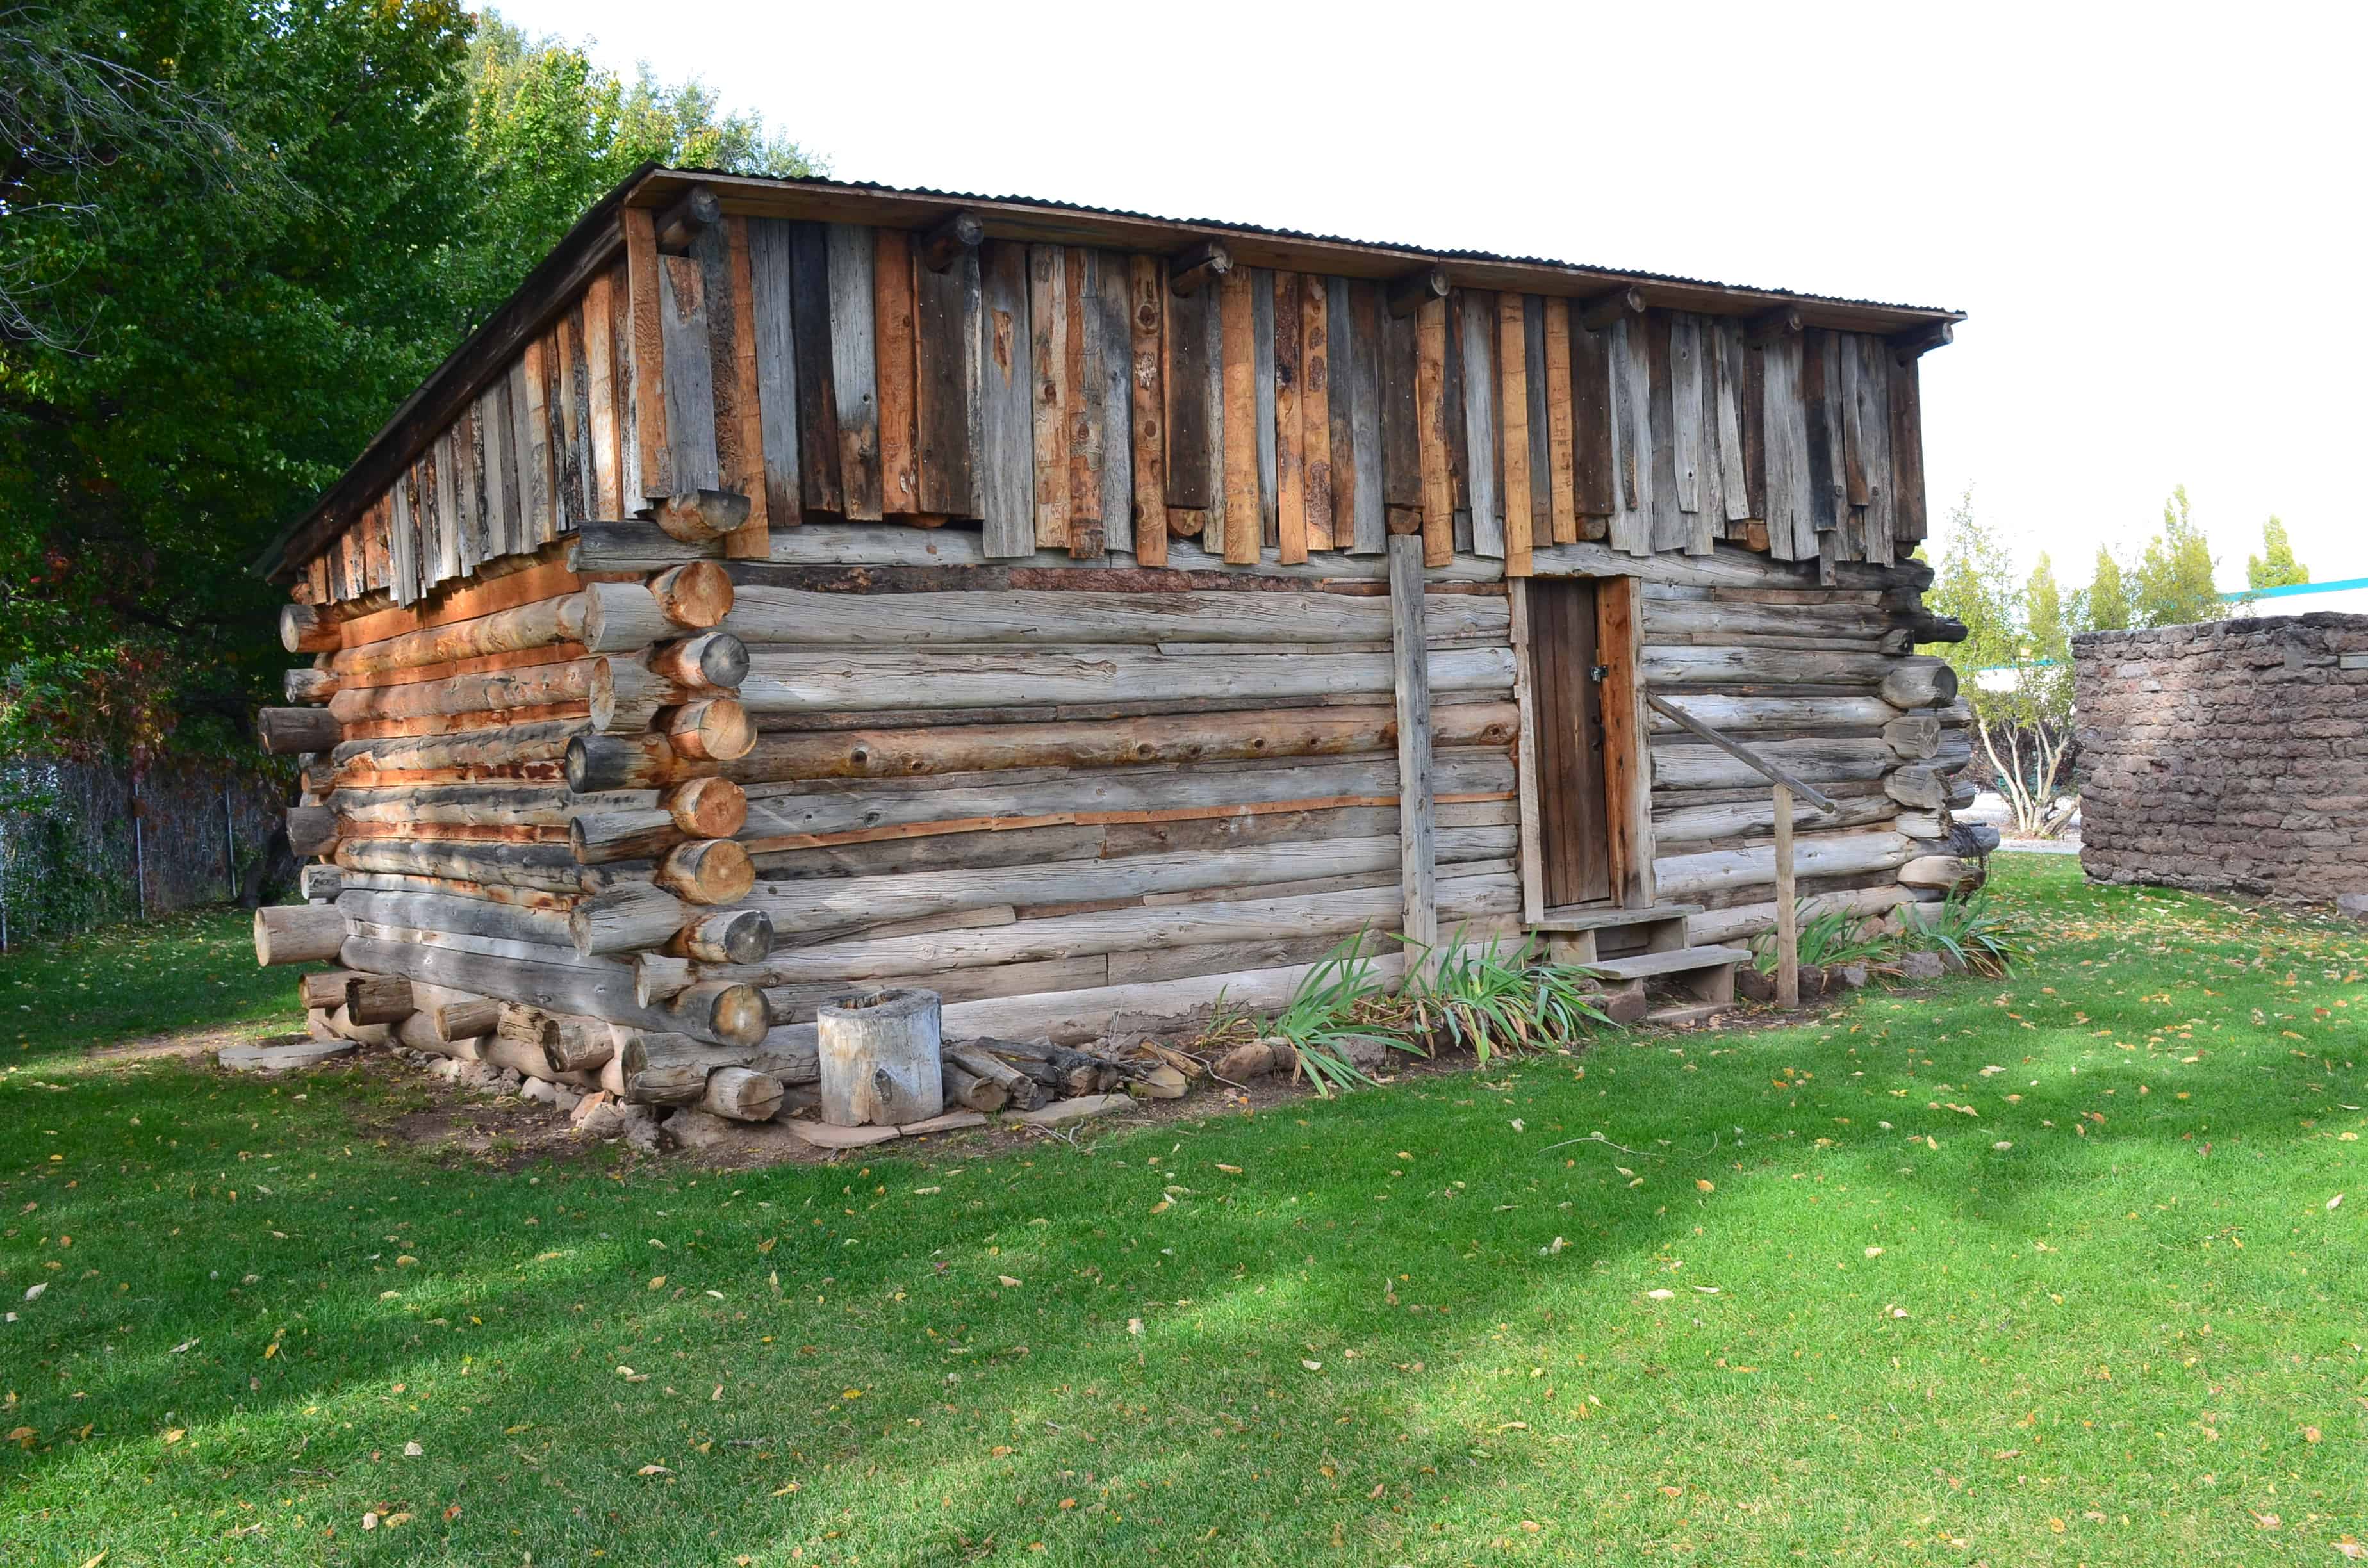 Romero Cabin at Manhattan Project National Historical Park in Los Alamos, New Mexico